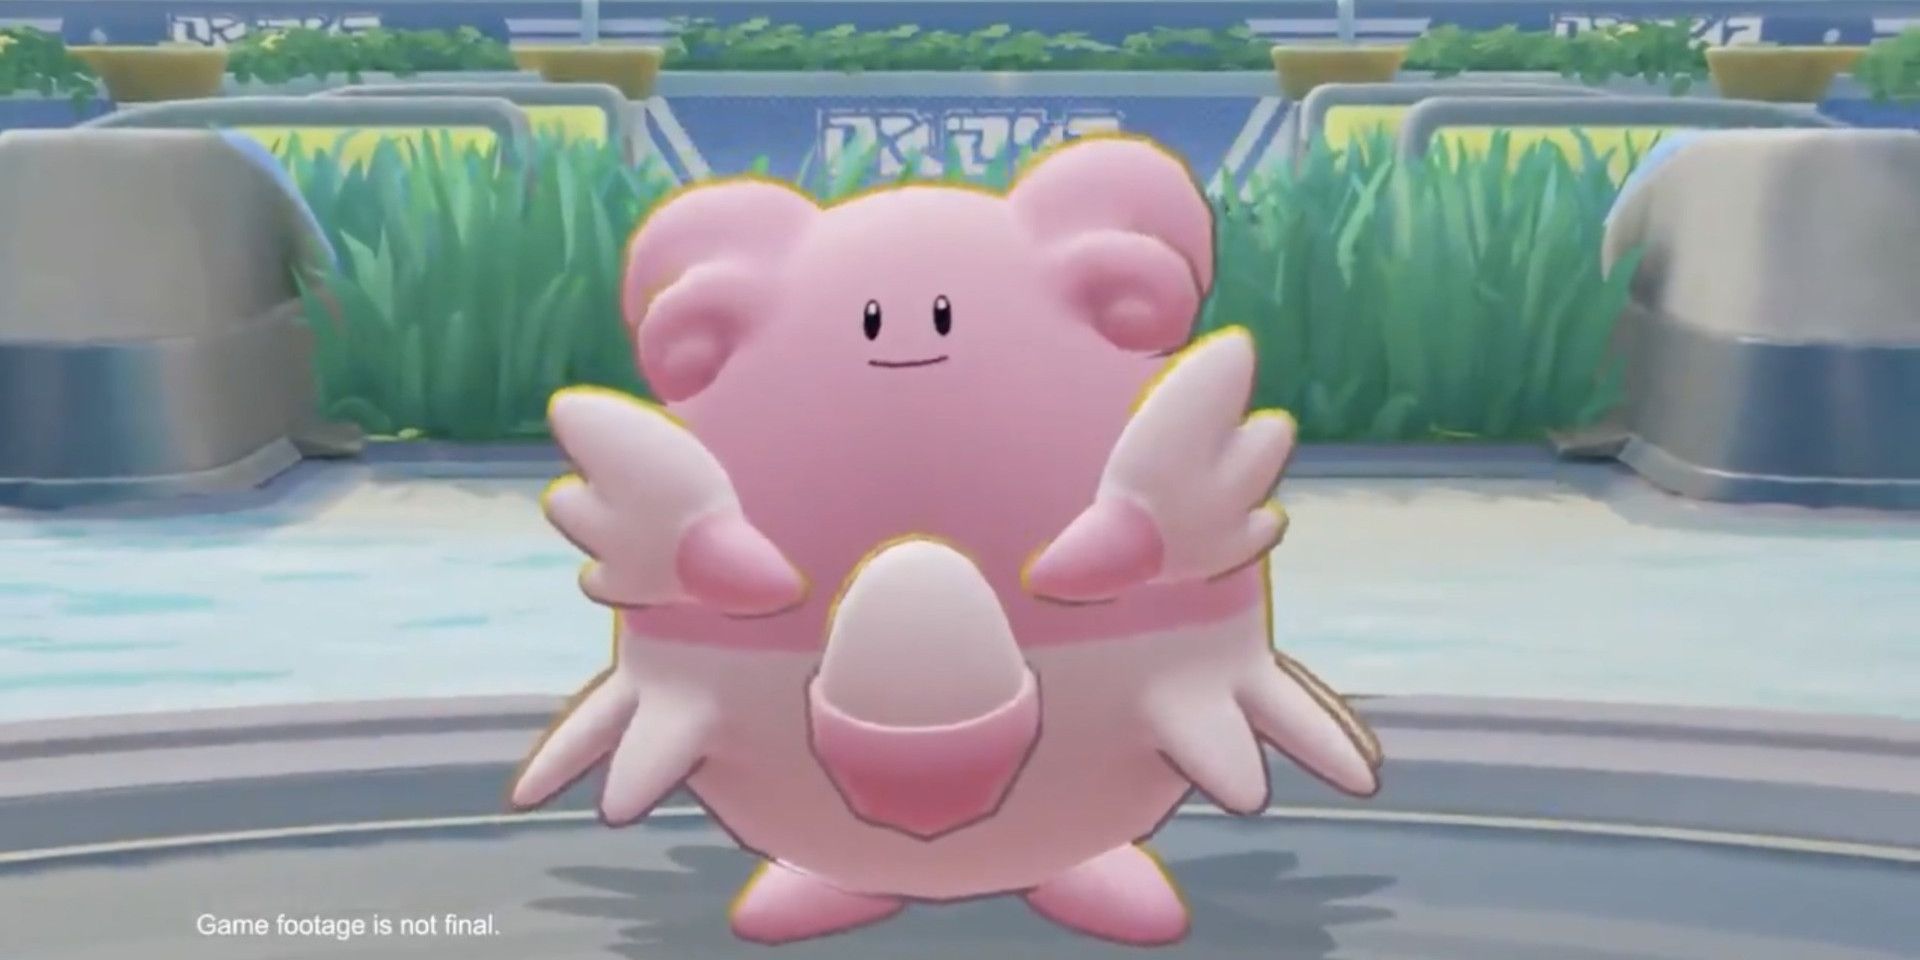 Image for Blissey is coming to Pokemon Unite later this week